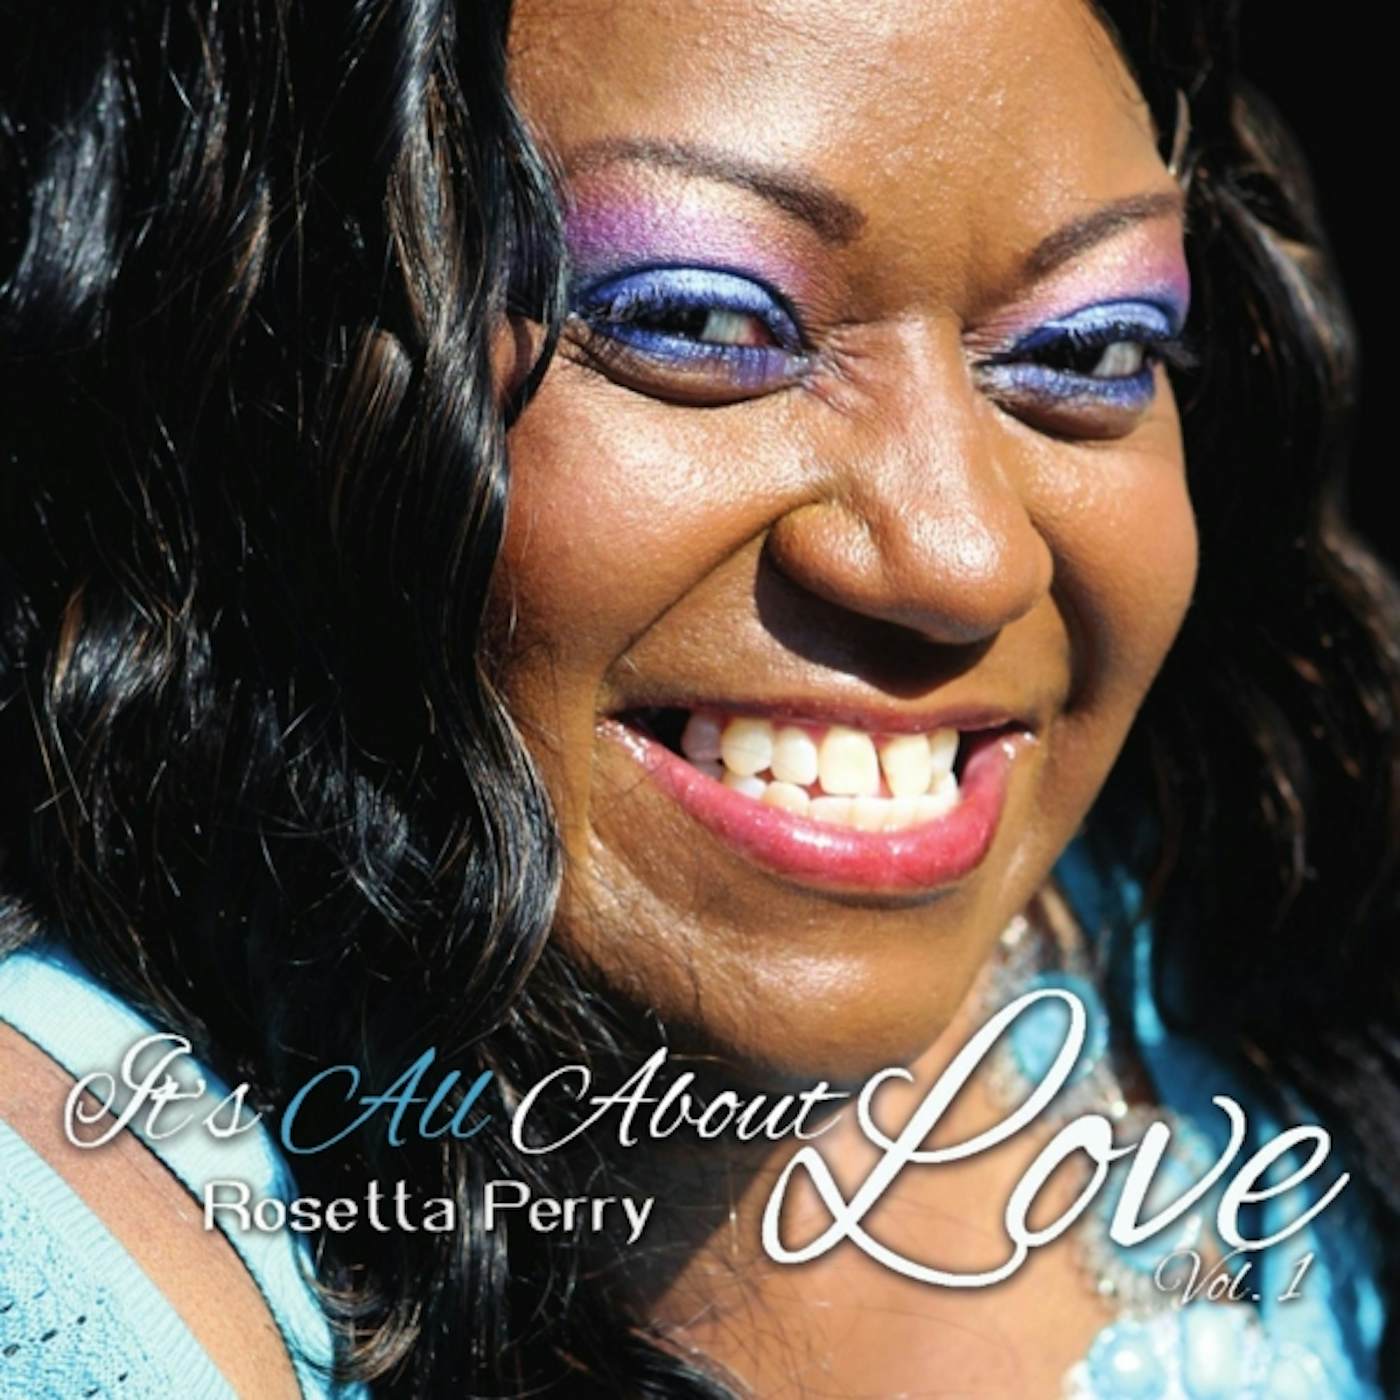 Rosetta Perry ITS ALL ABOUT LOVE VOL. 1 CD